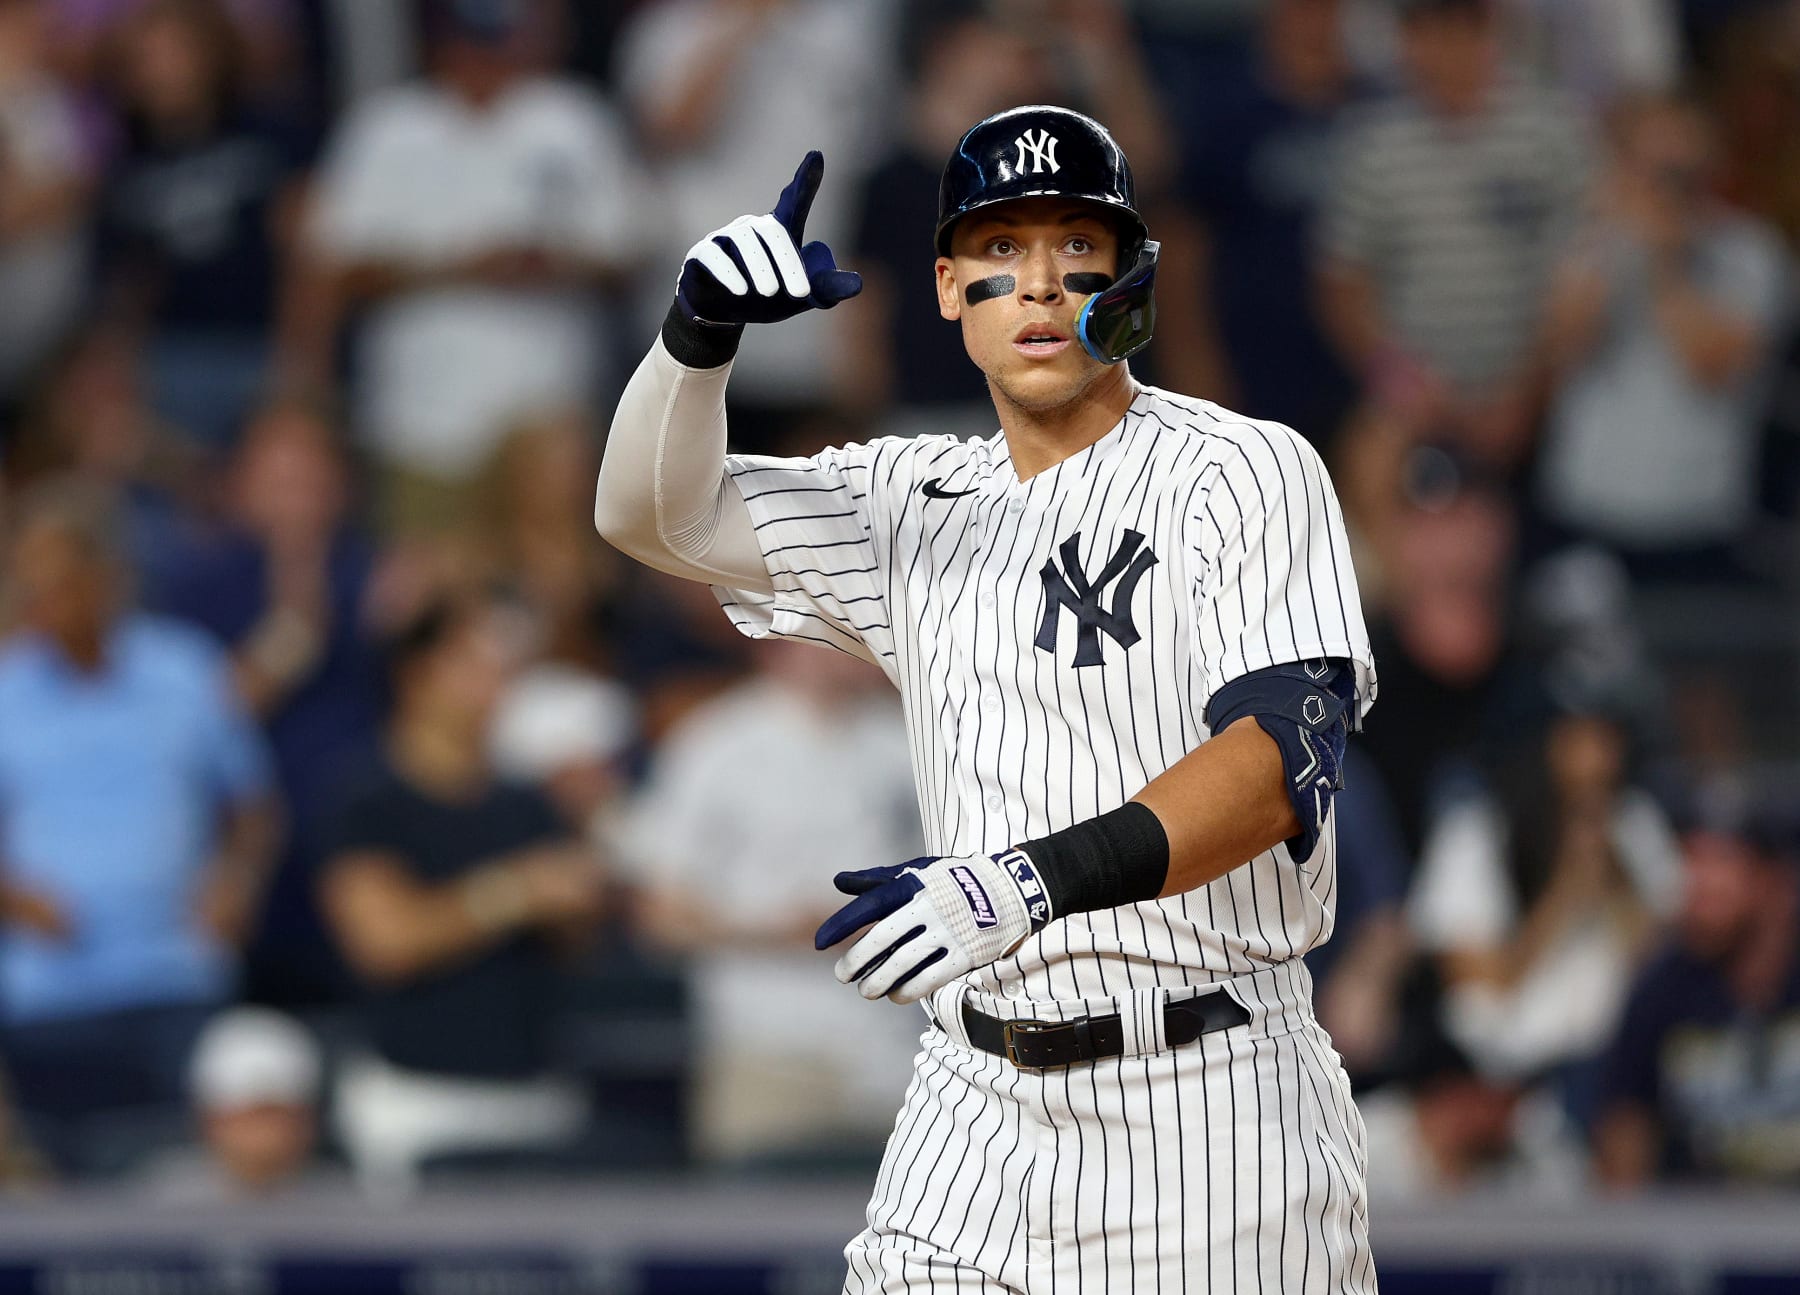 The chase for 28 (2022 Yankees Hype Video) 